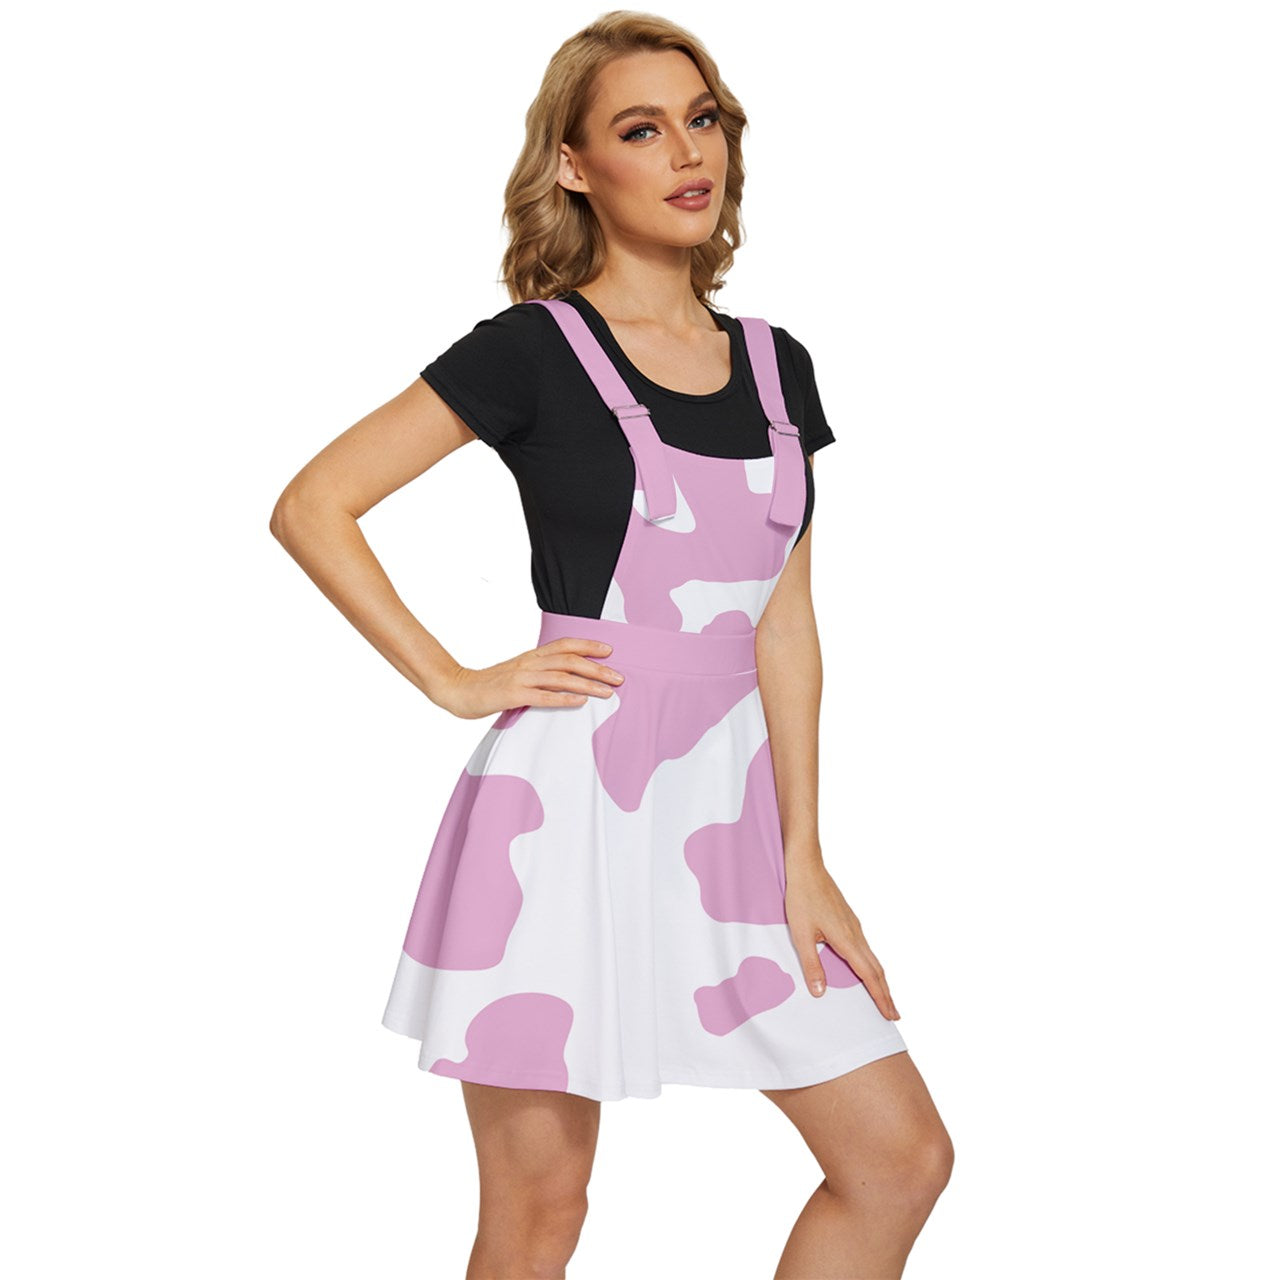 Cow Print Apron Dress in Pink